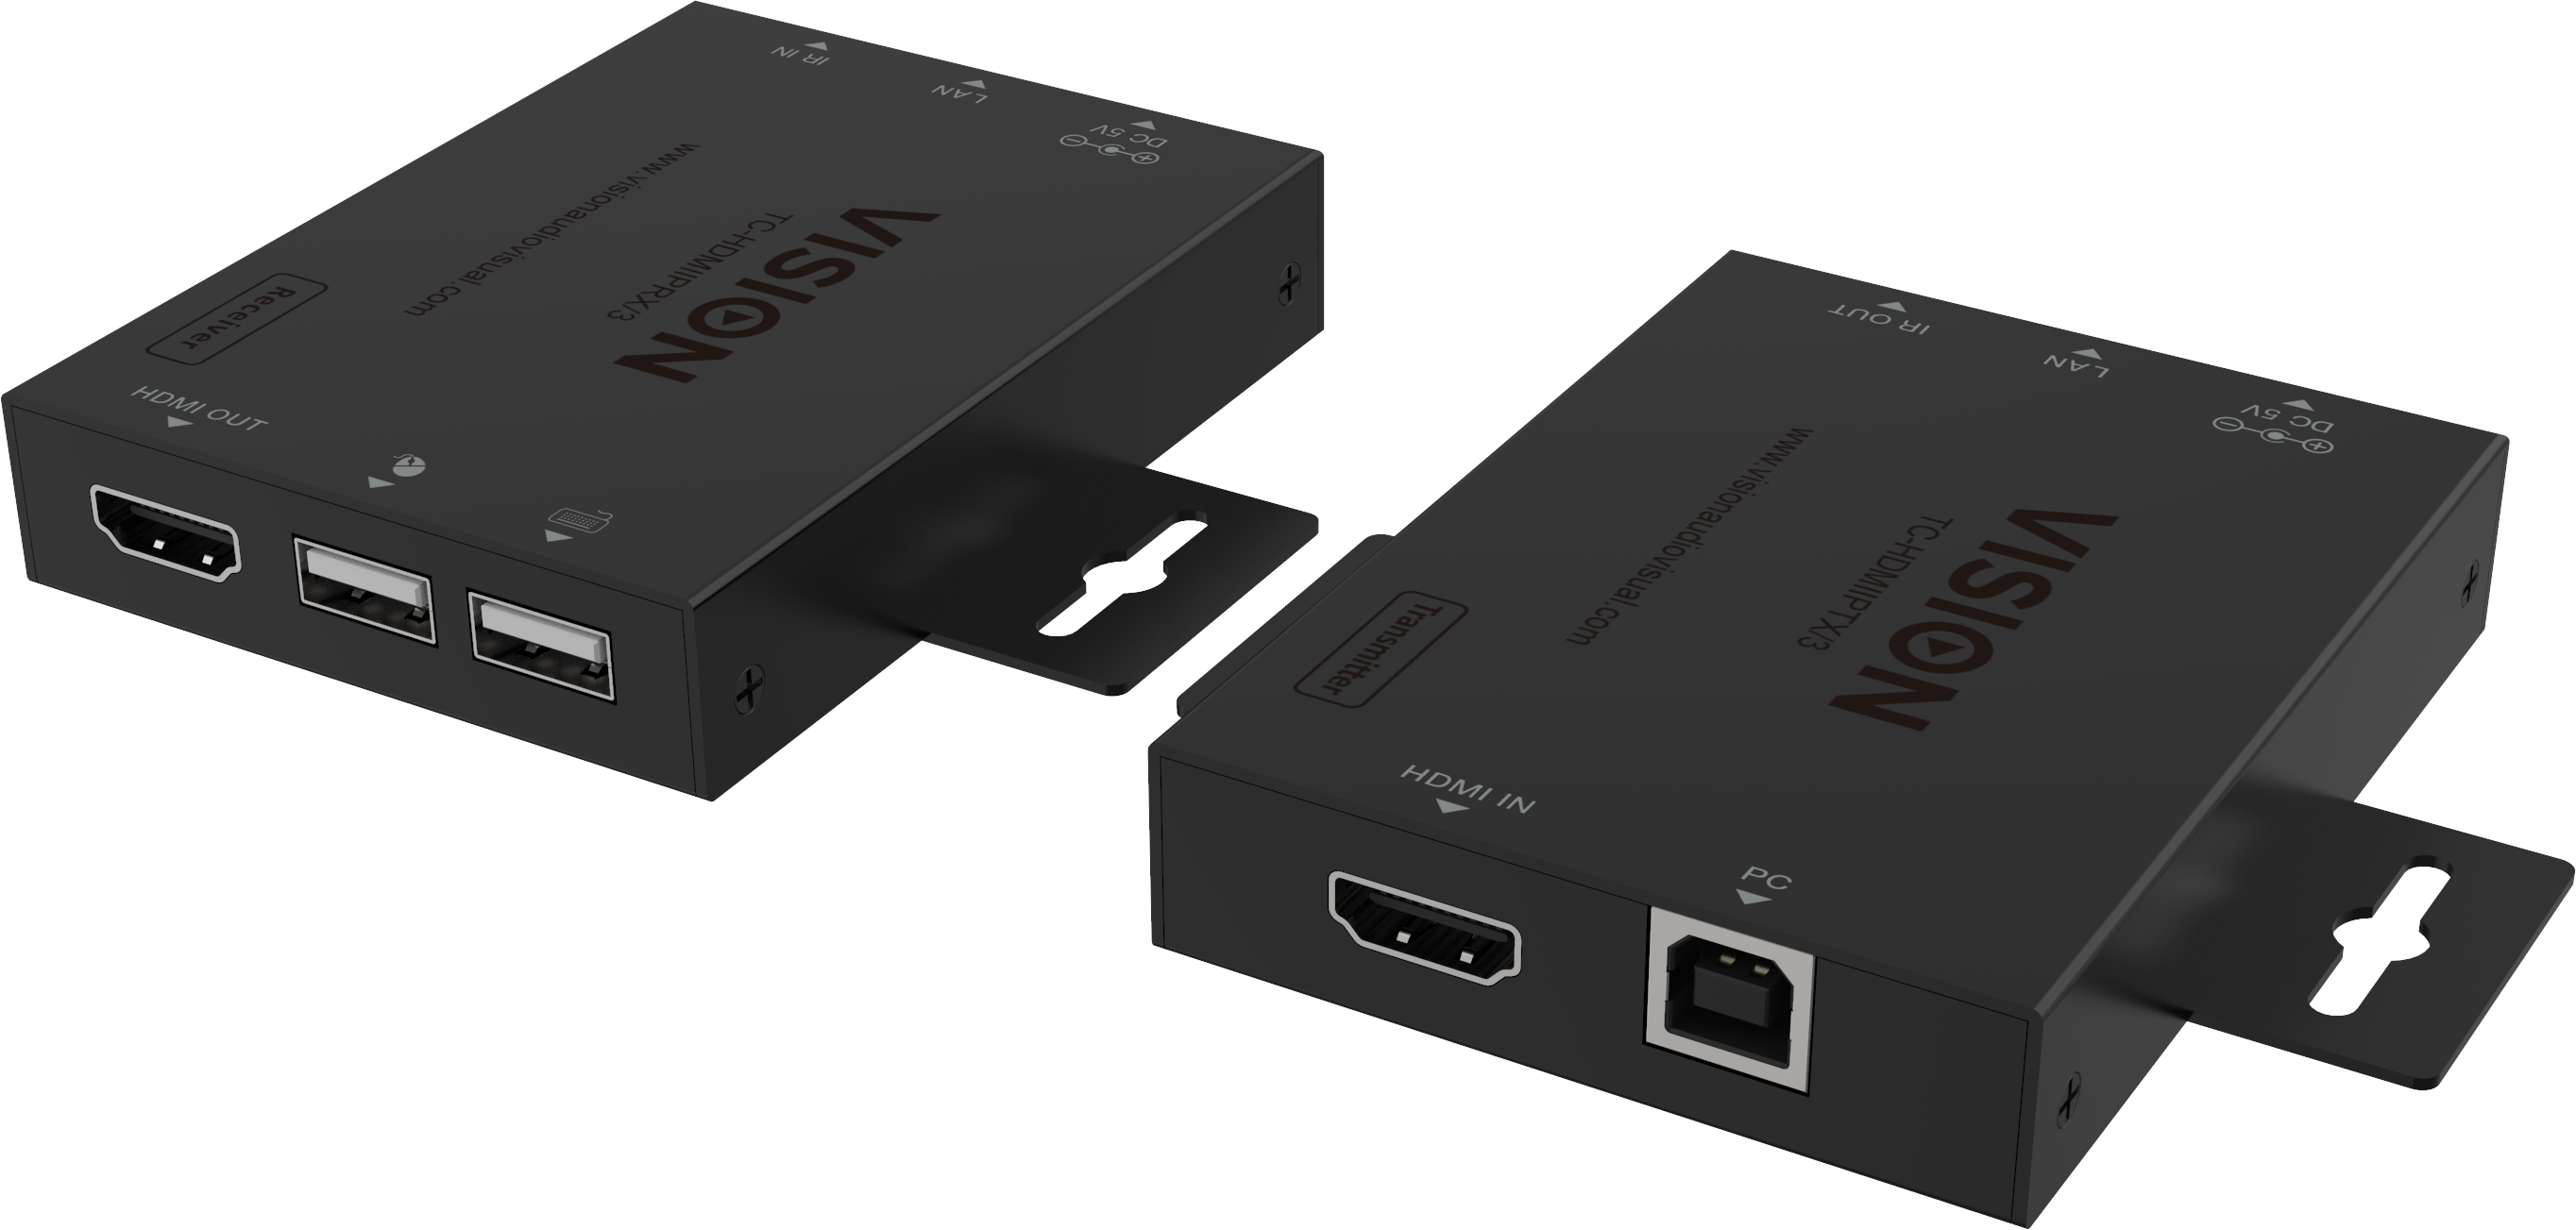 Vision Enhances HDMI Over IP Product with Network Streaming Capability